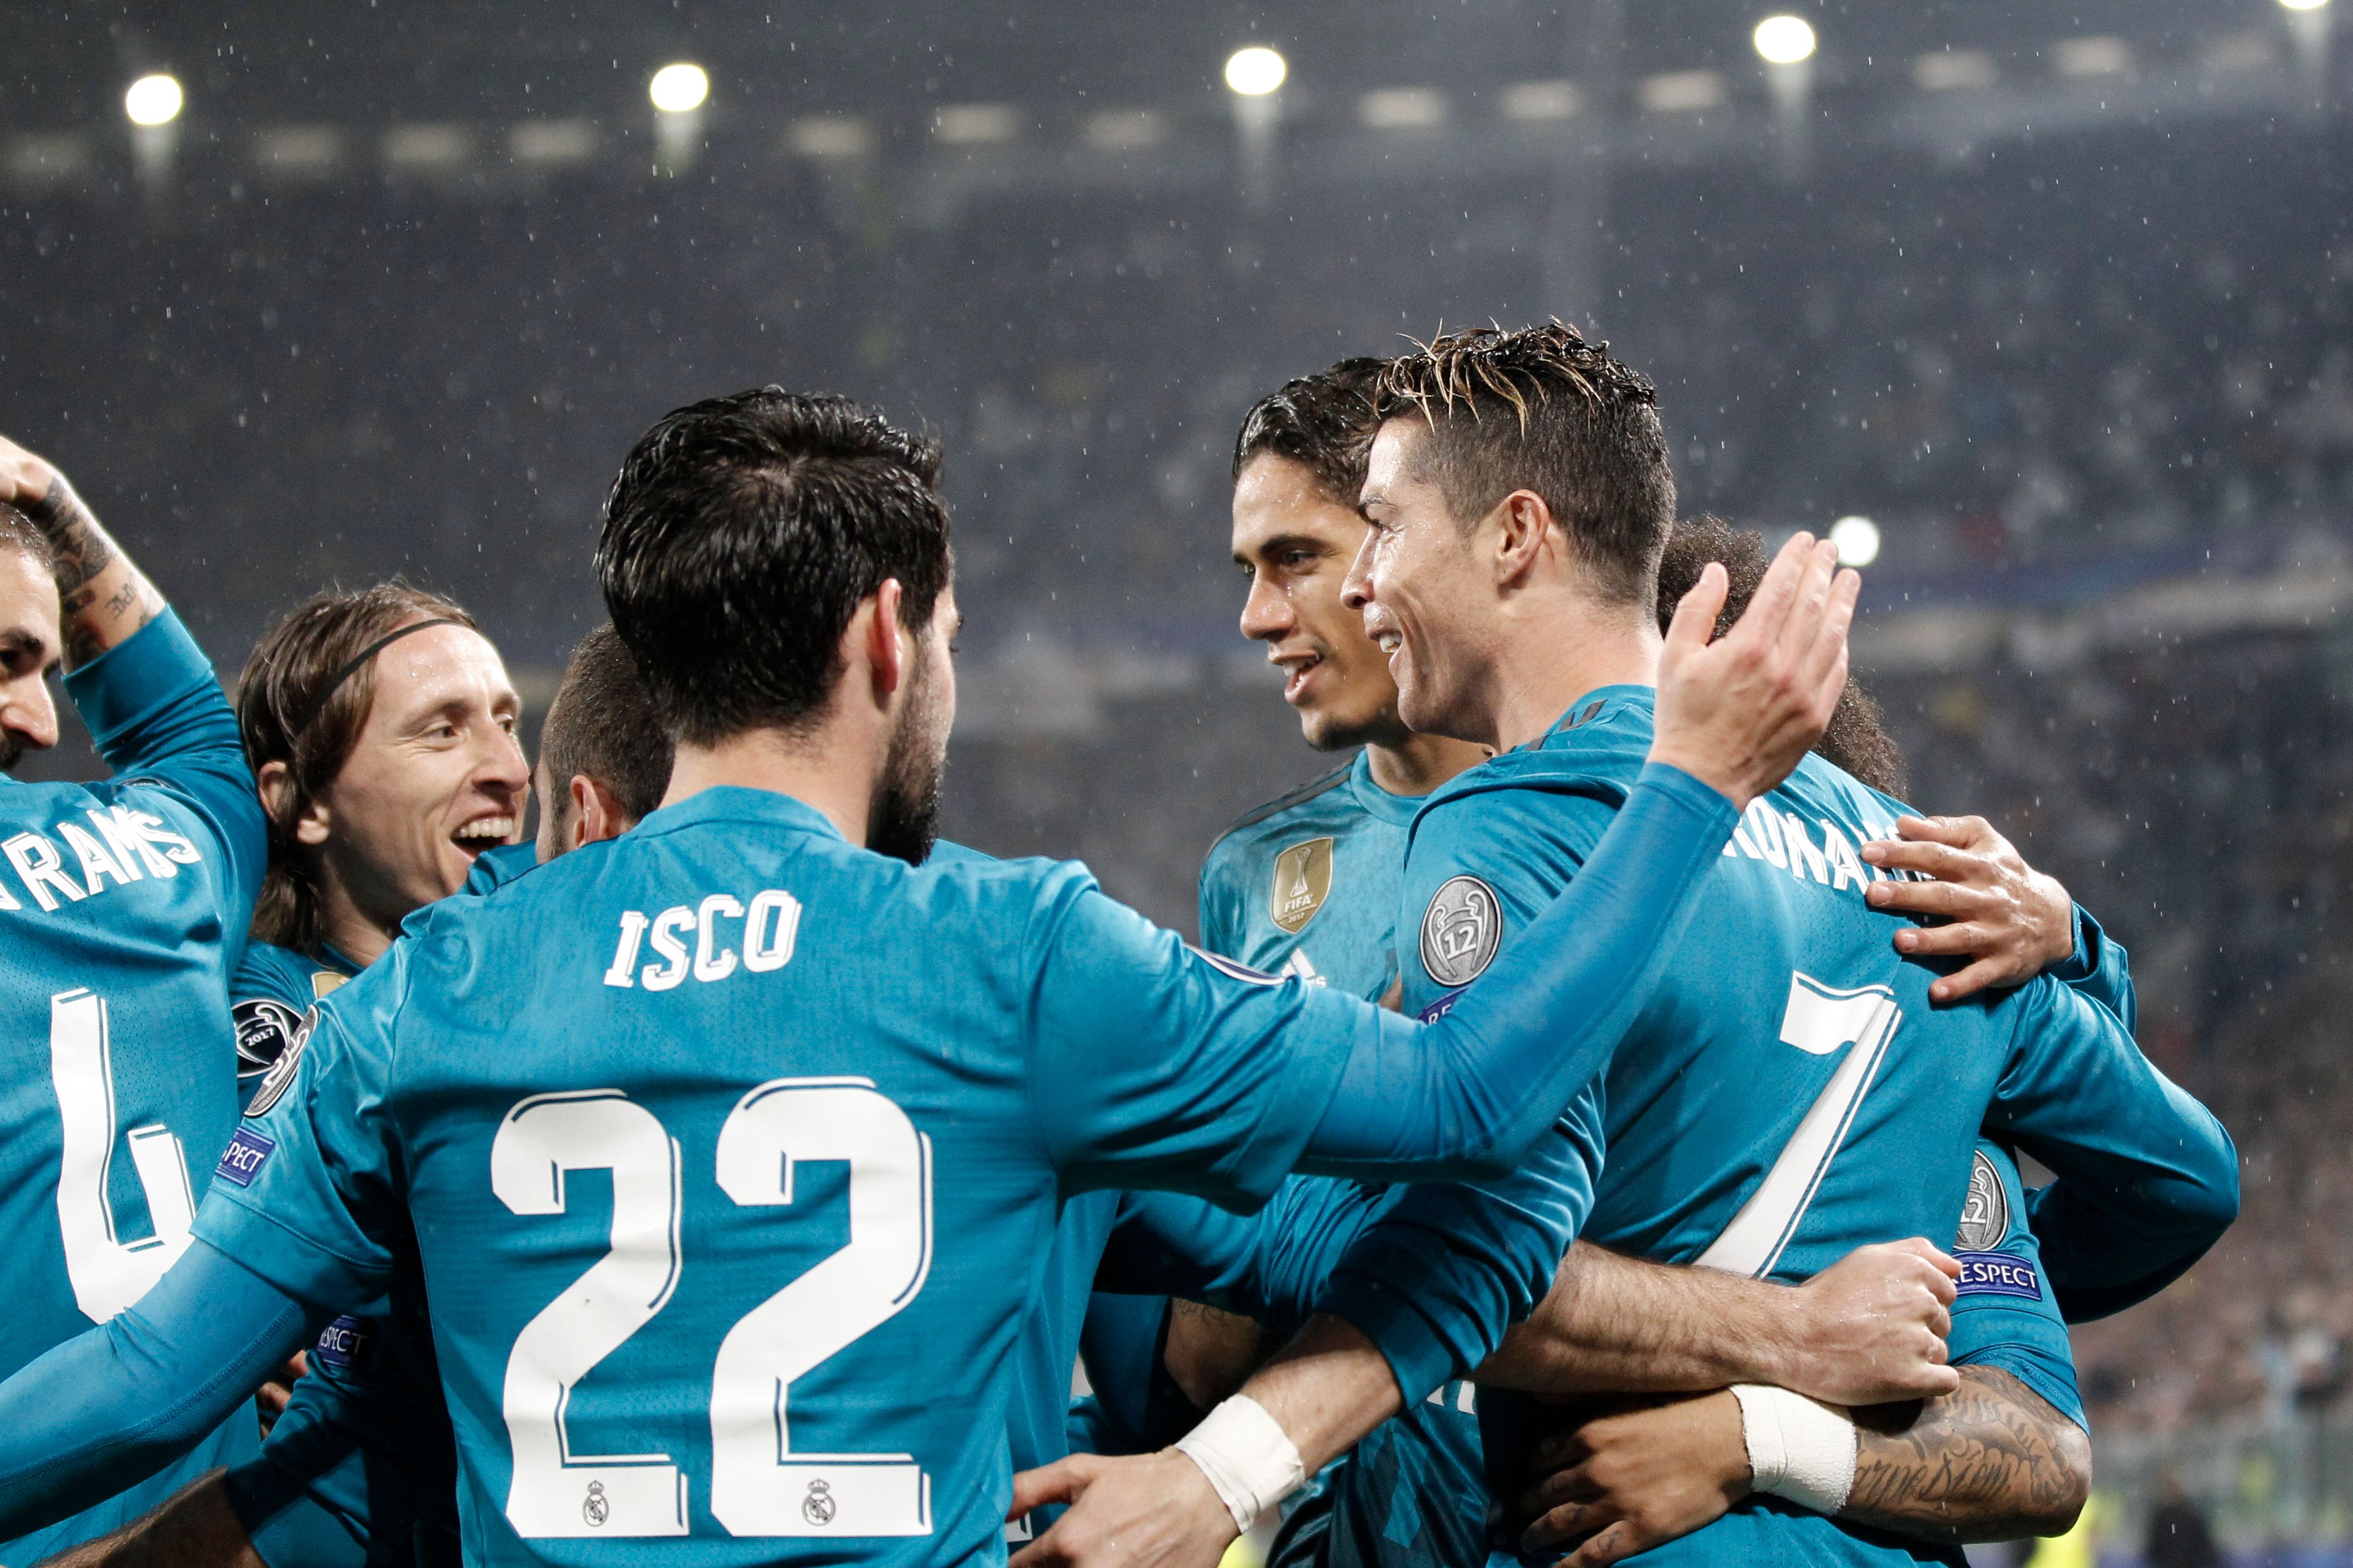 Real Madrid's Portuguese forward Cristiano Ronaldo (R) celebrates with teammates after scoring during the UEFA Champions League quarter-final first leg football match between Juventus and Real Madrid at the Allianz Stadium in Turin on April 3, 2018. / AFP PHOTO / Isabella BONOTTO        (Photo credit should read ISABELLA BONOTTO/AFP/Getty Images)